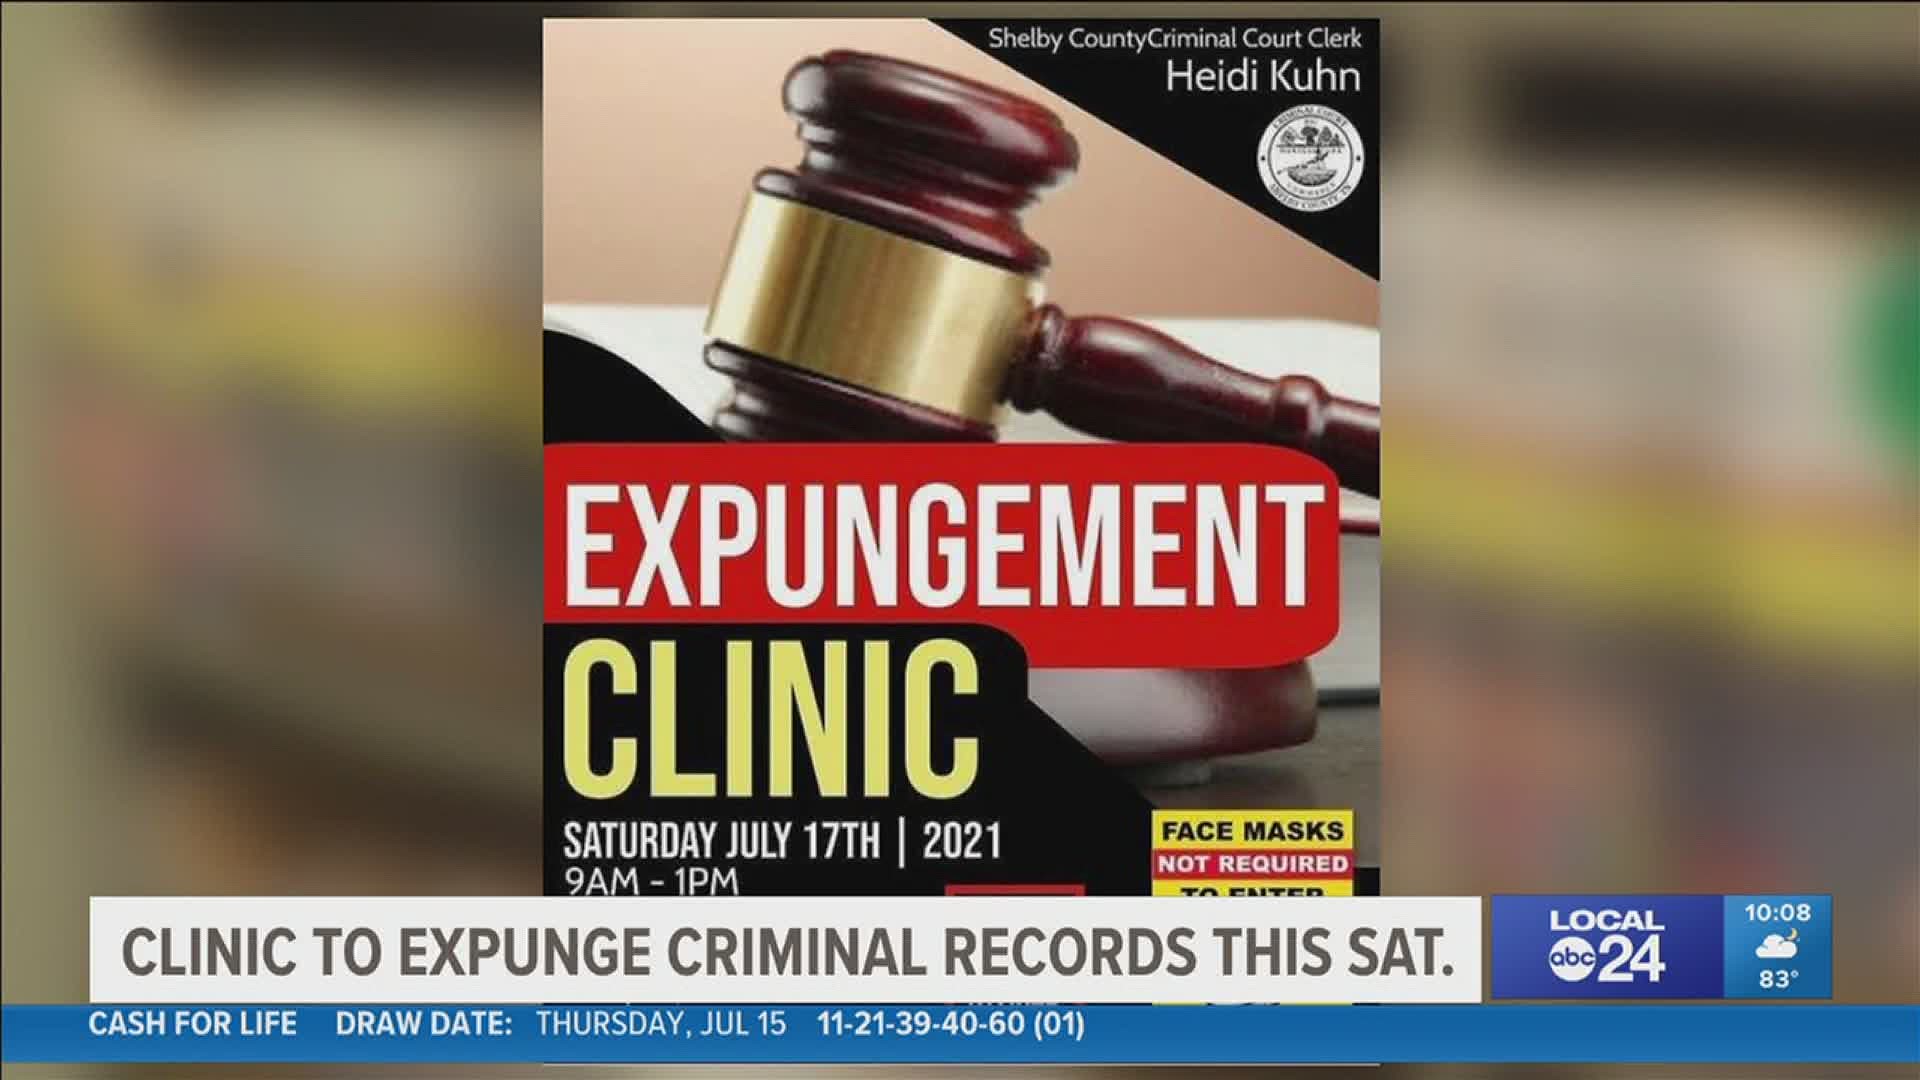 There are different classes of felonies that can be expunged and the clinic will help start the process.